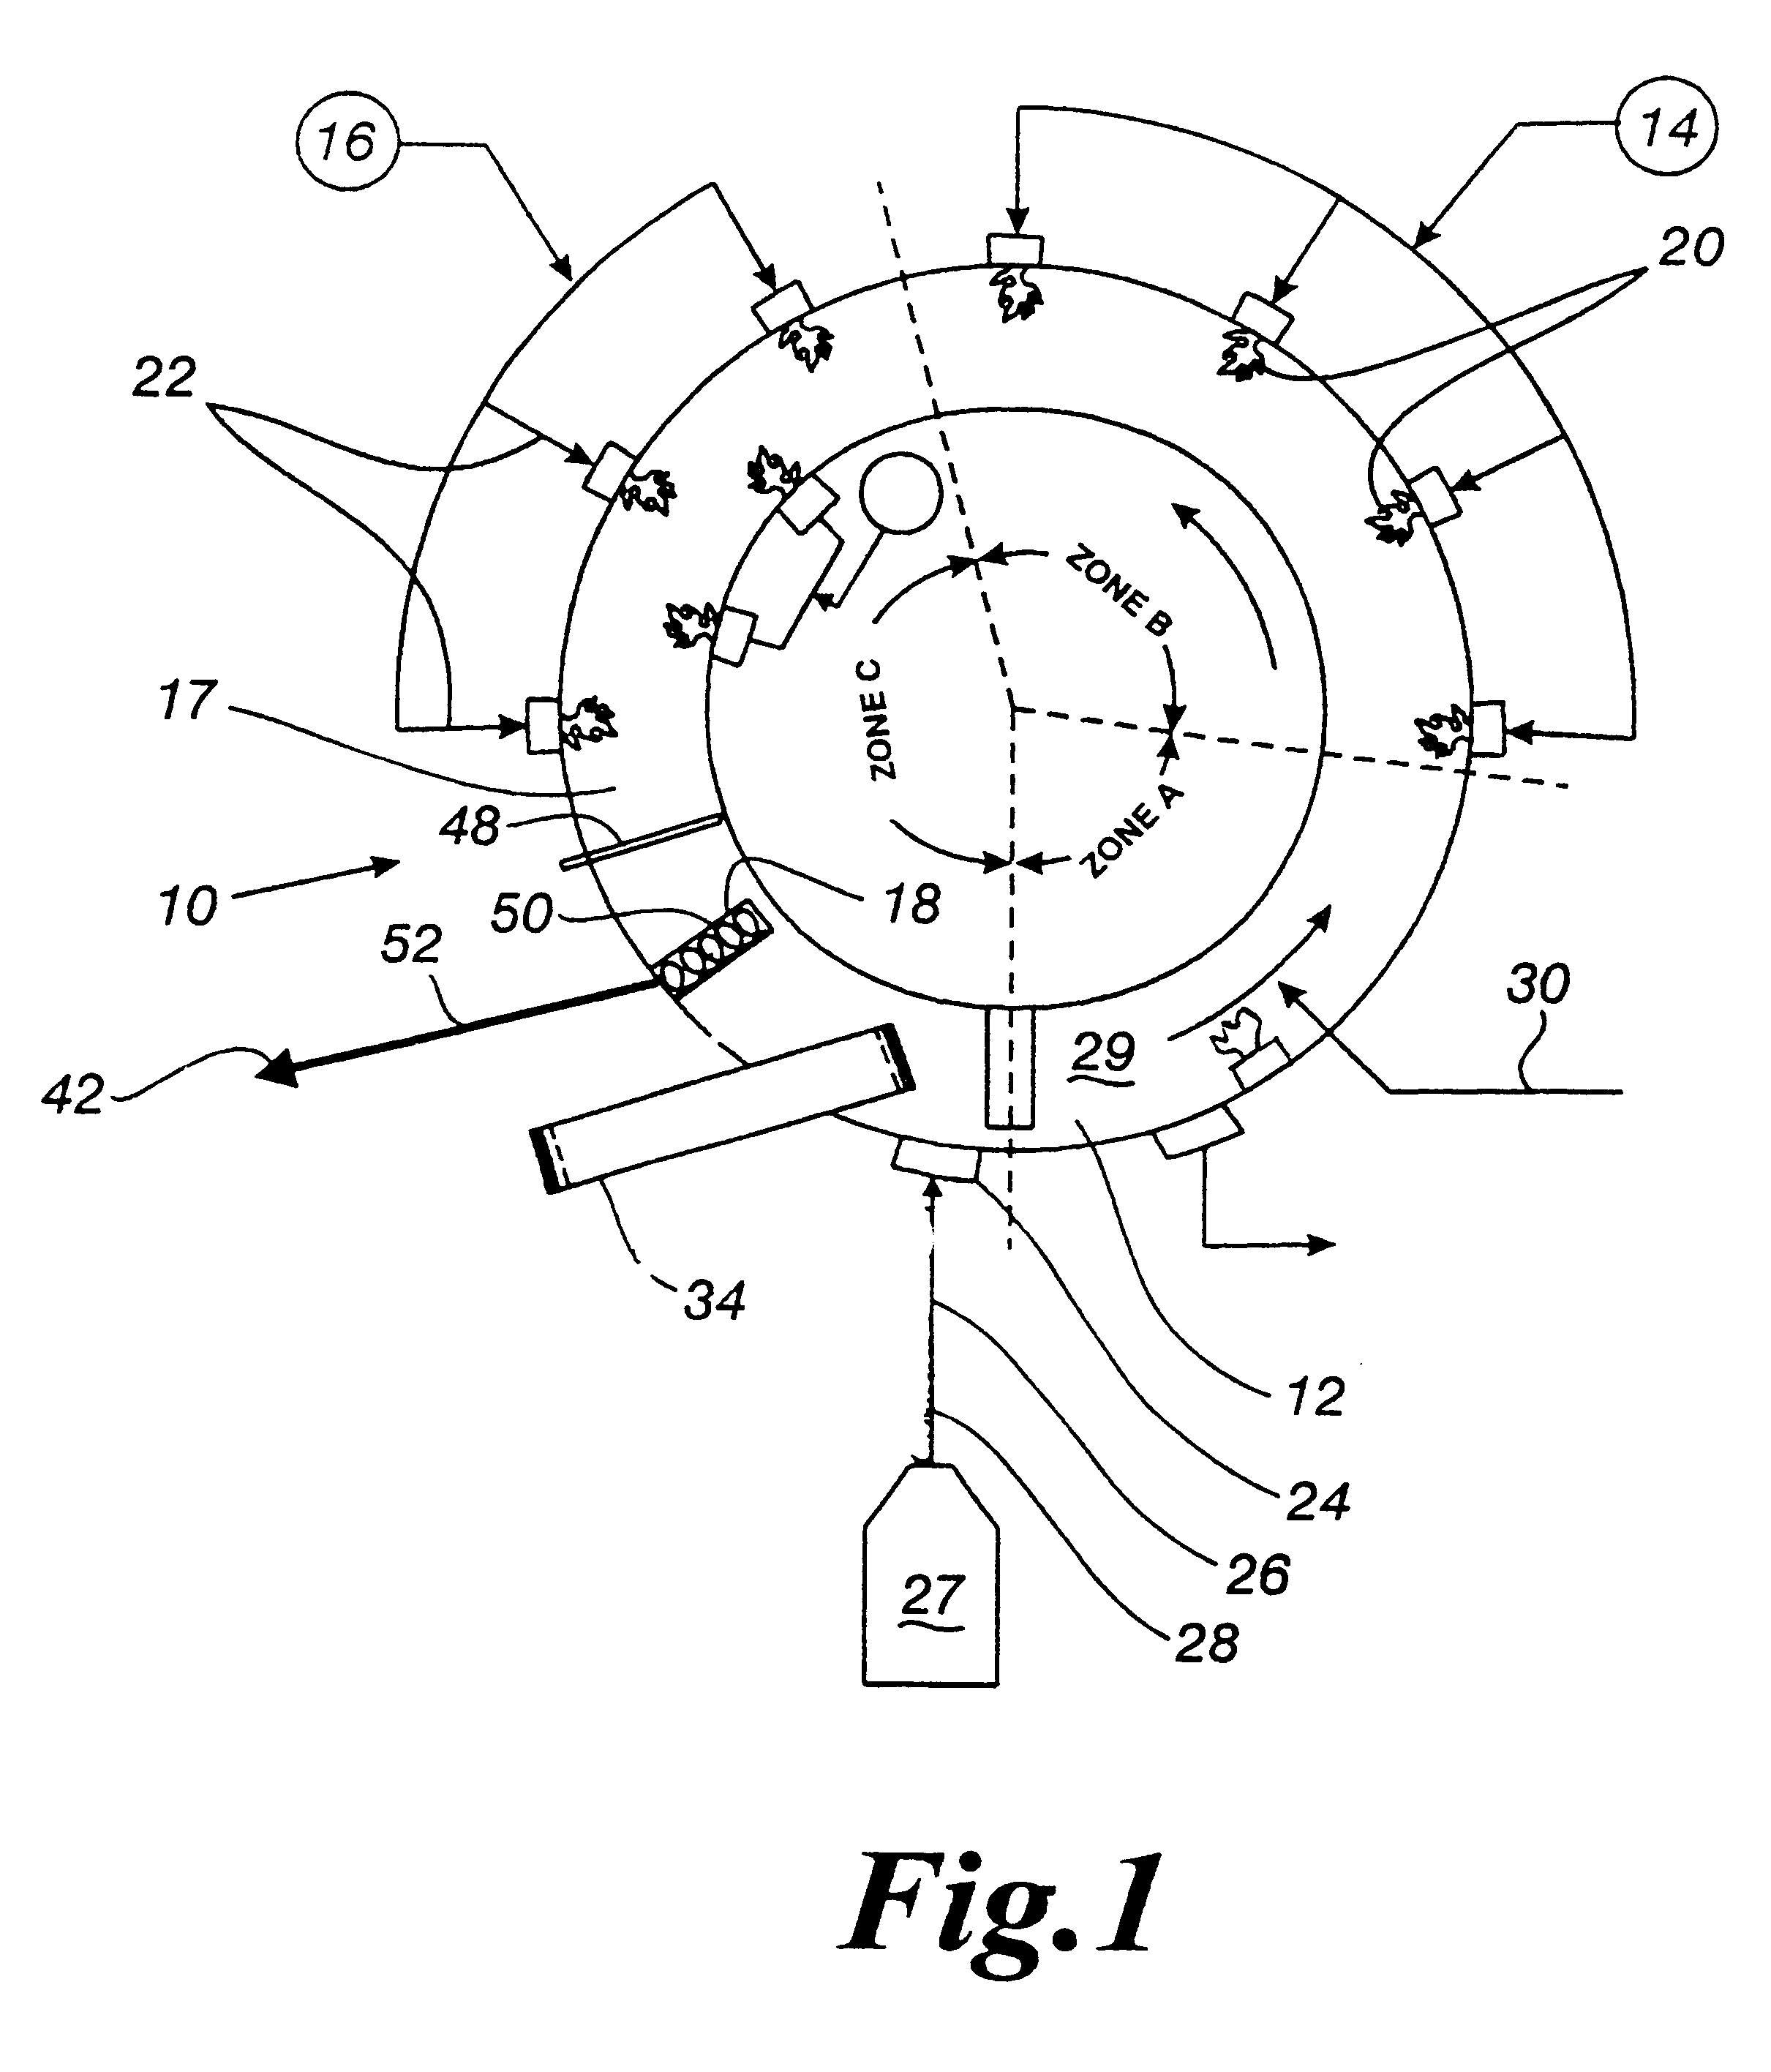 Iron production method of operation in a rotary hearth furnace and improved furnace apparatus